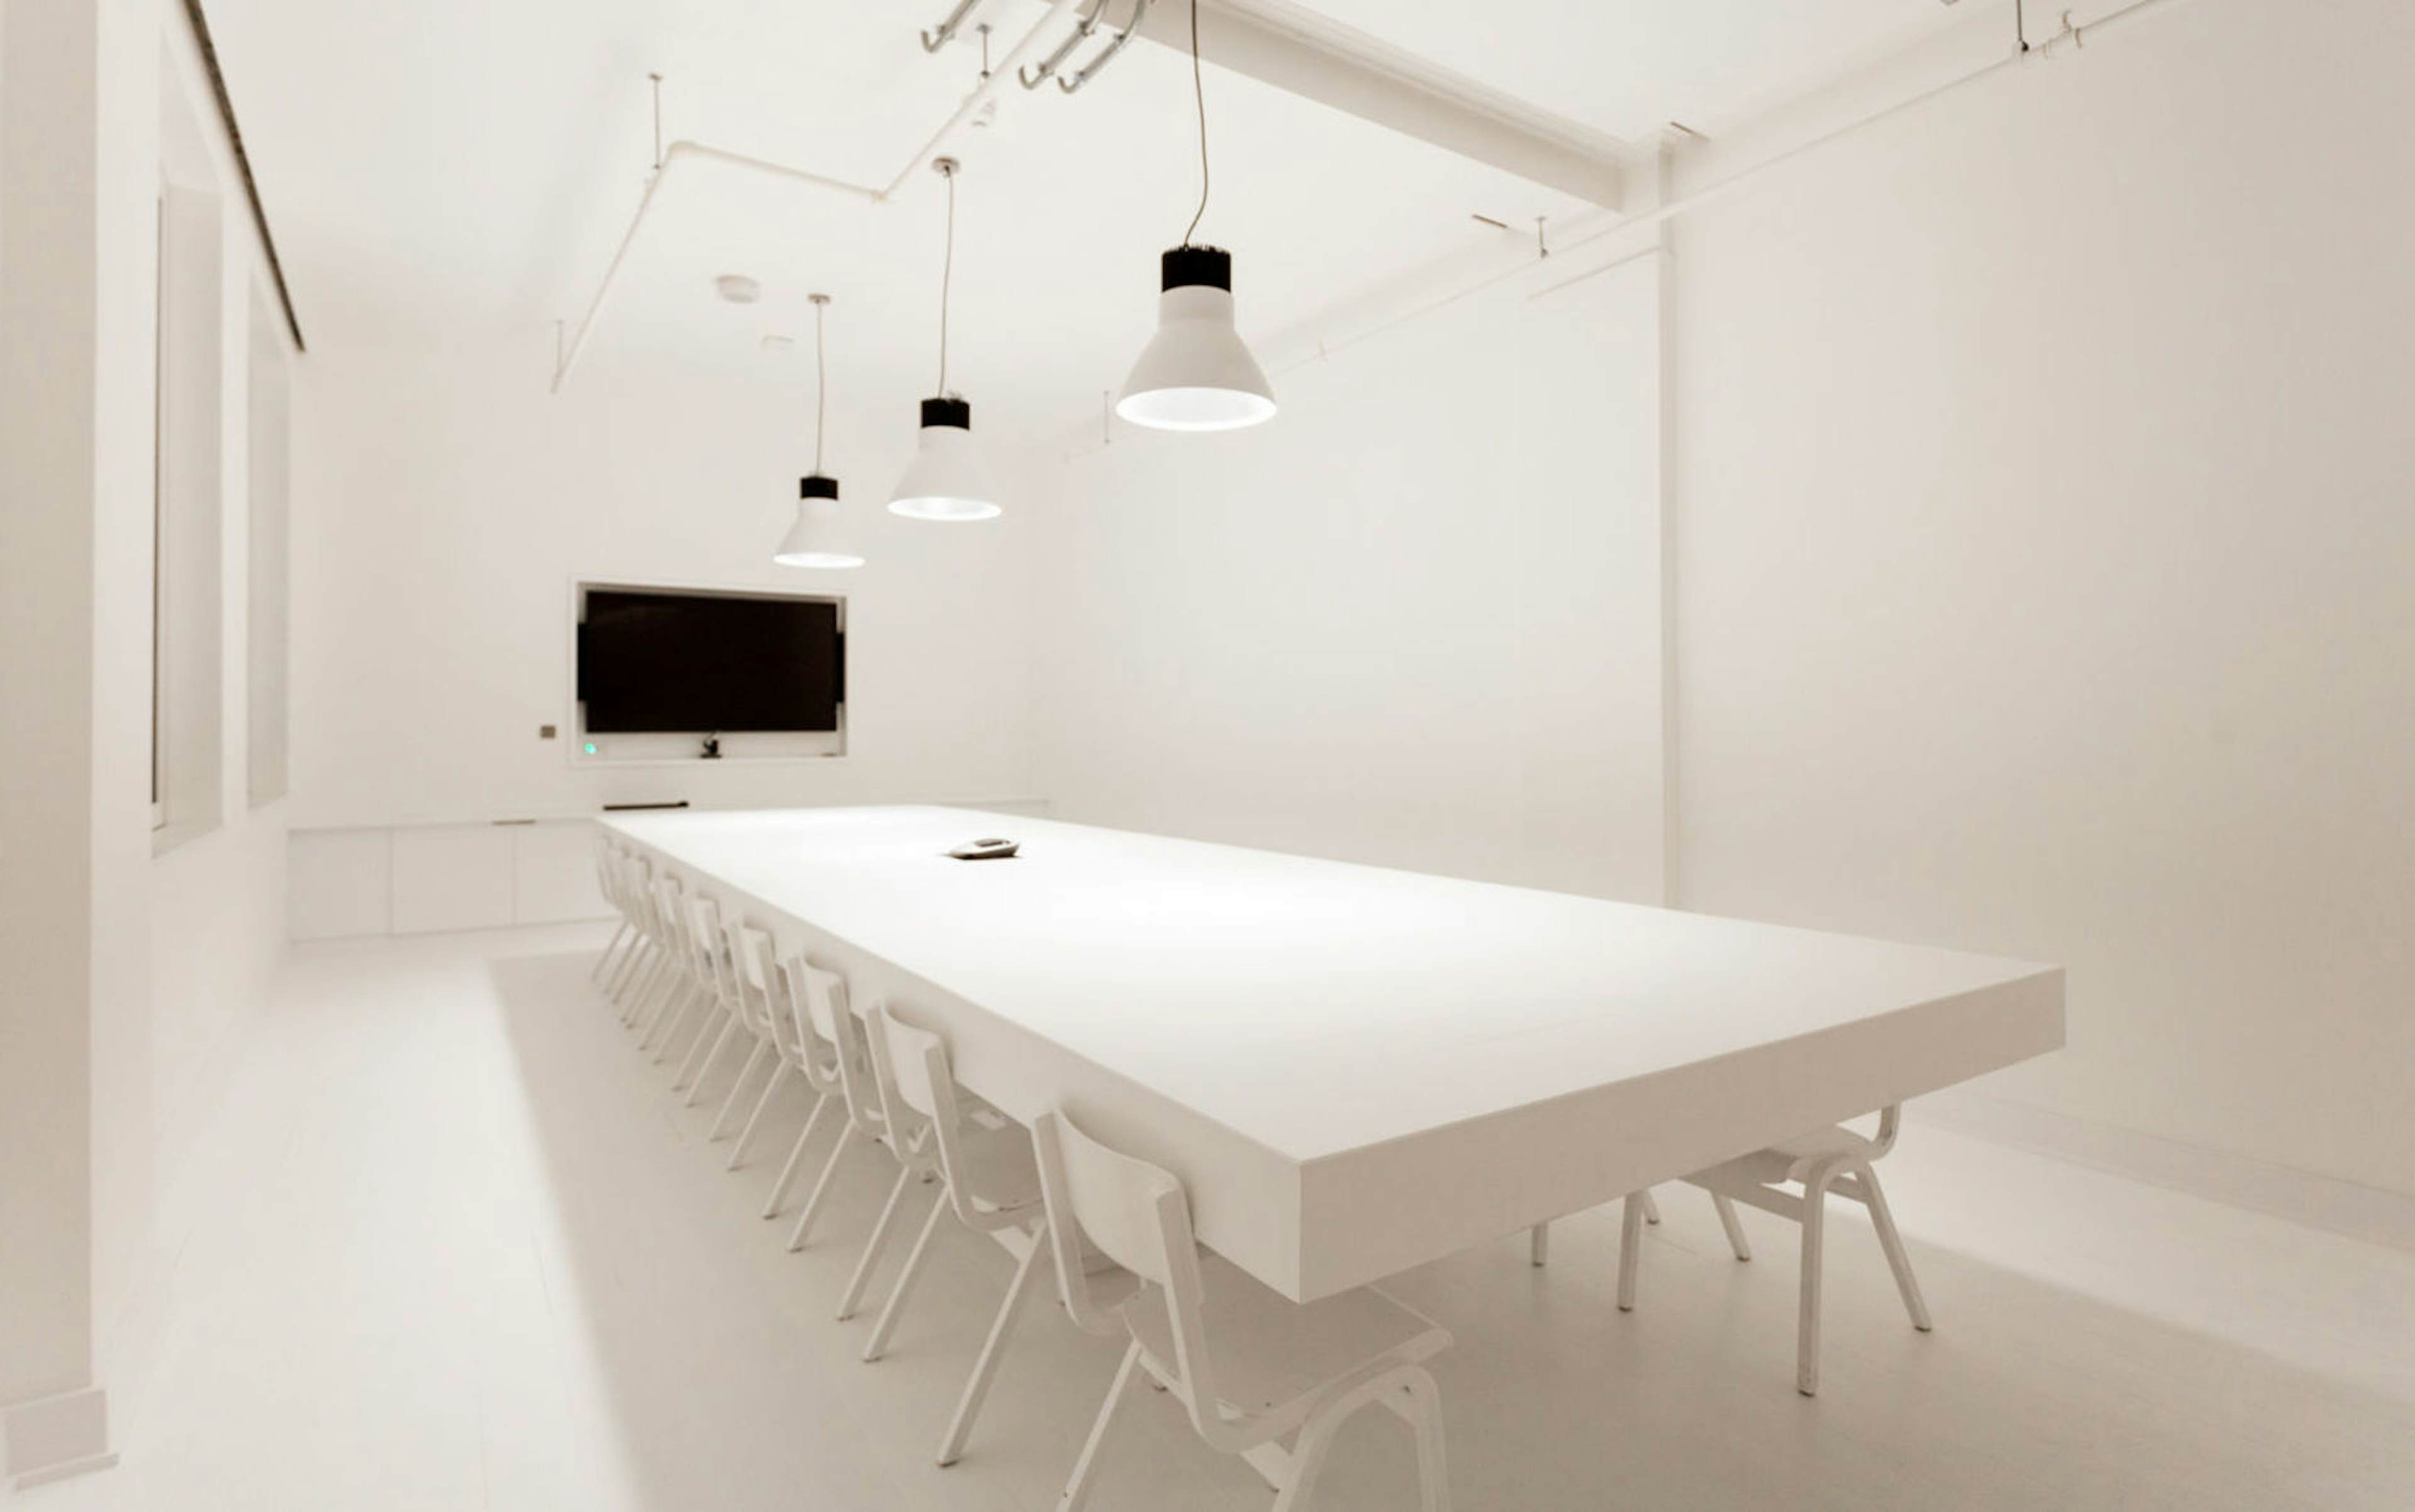 Huckletree Shoreditch - Cupertino Meeting Room image 1